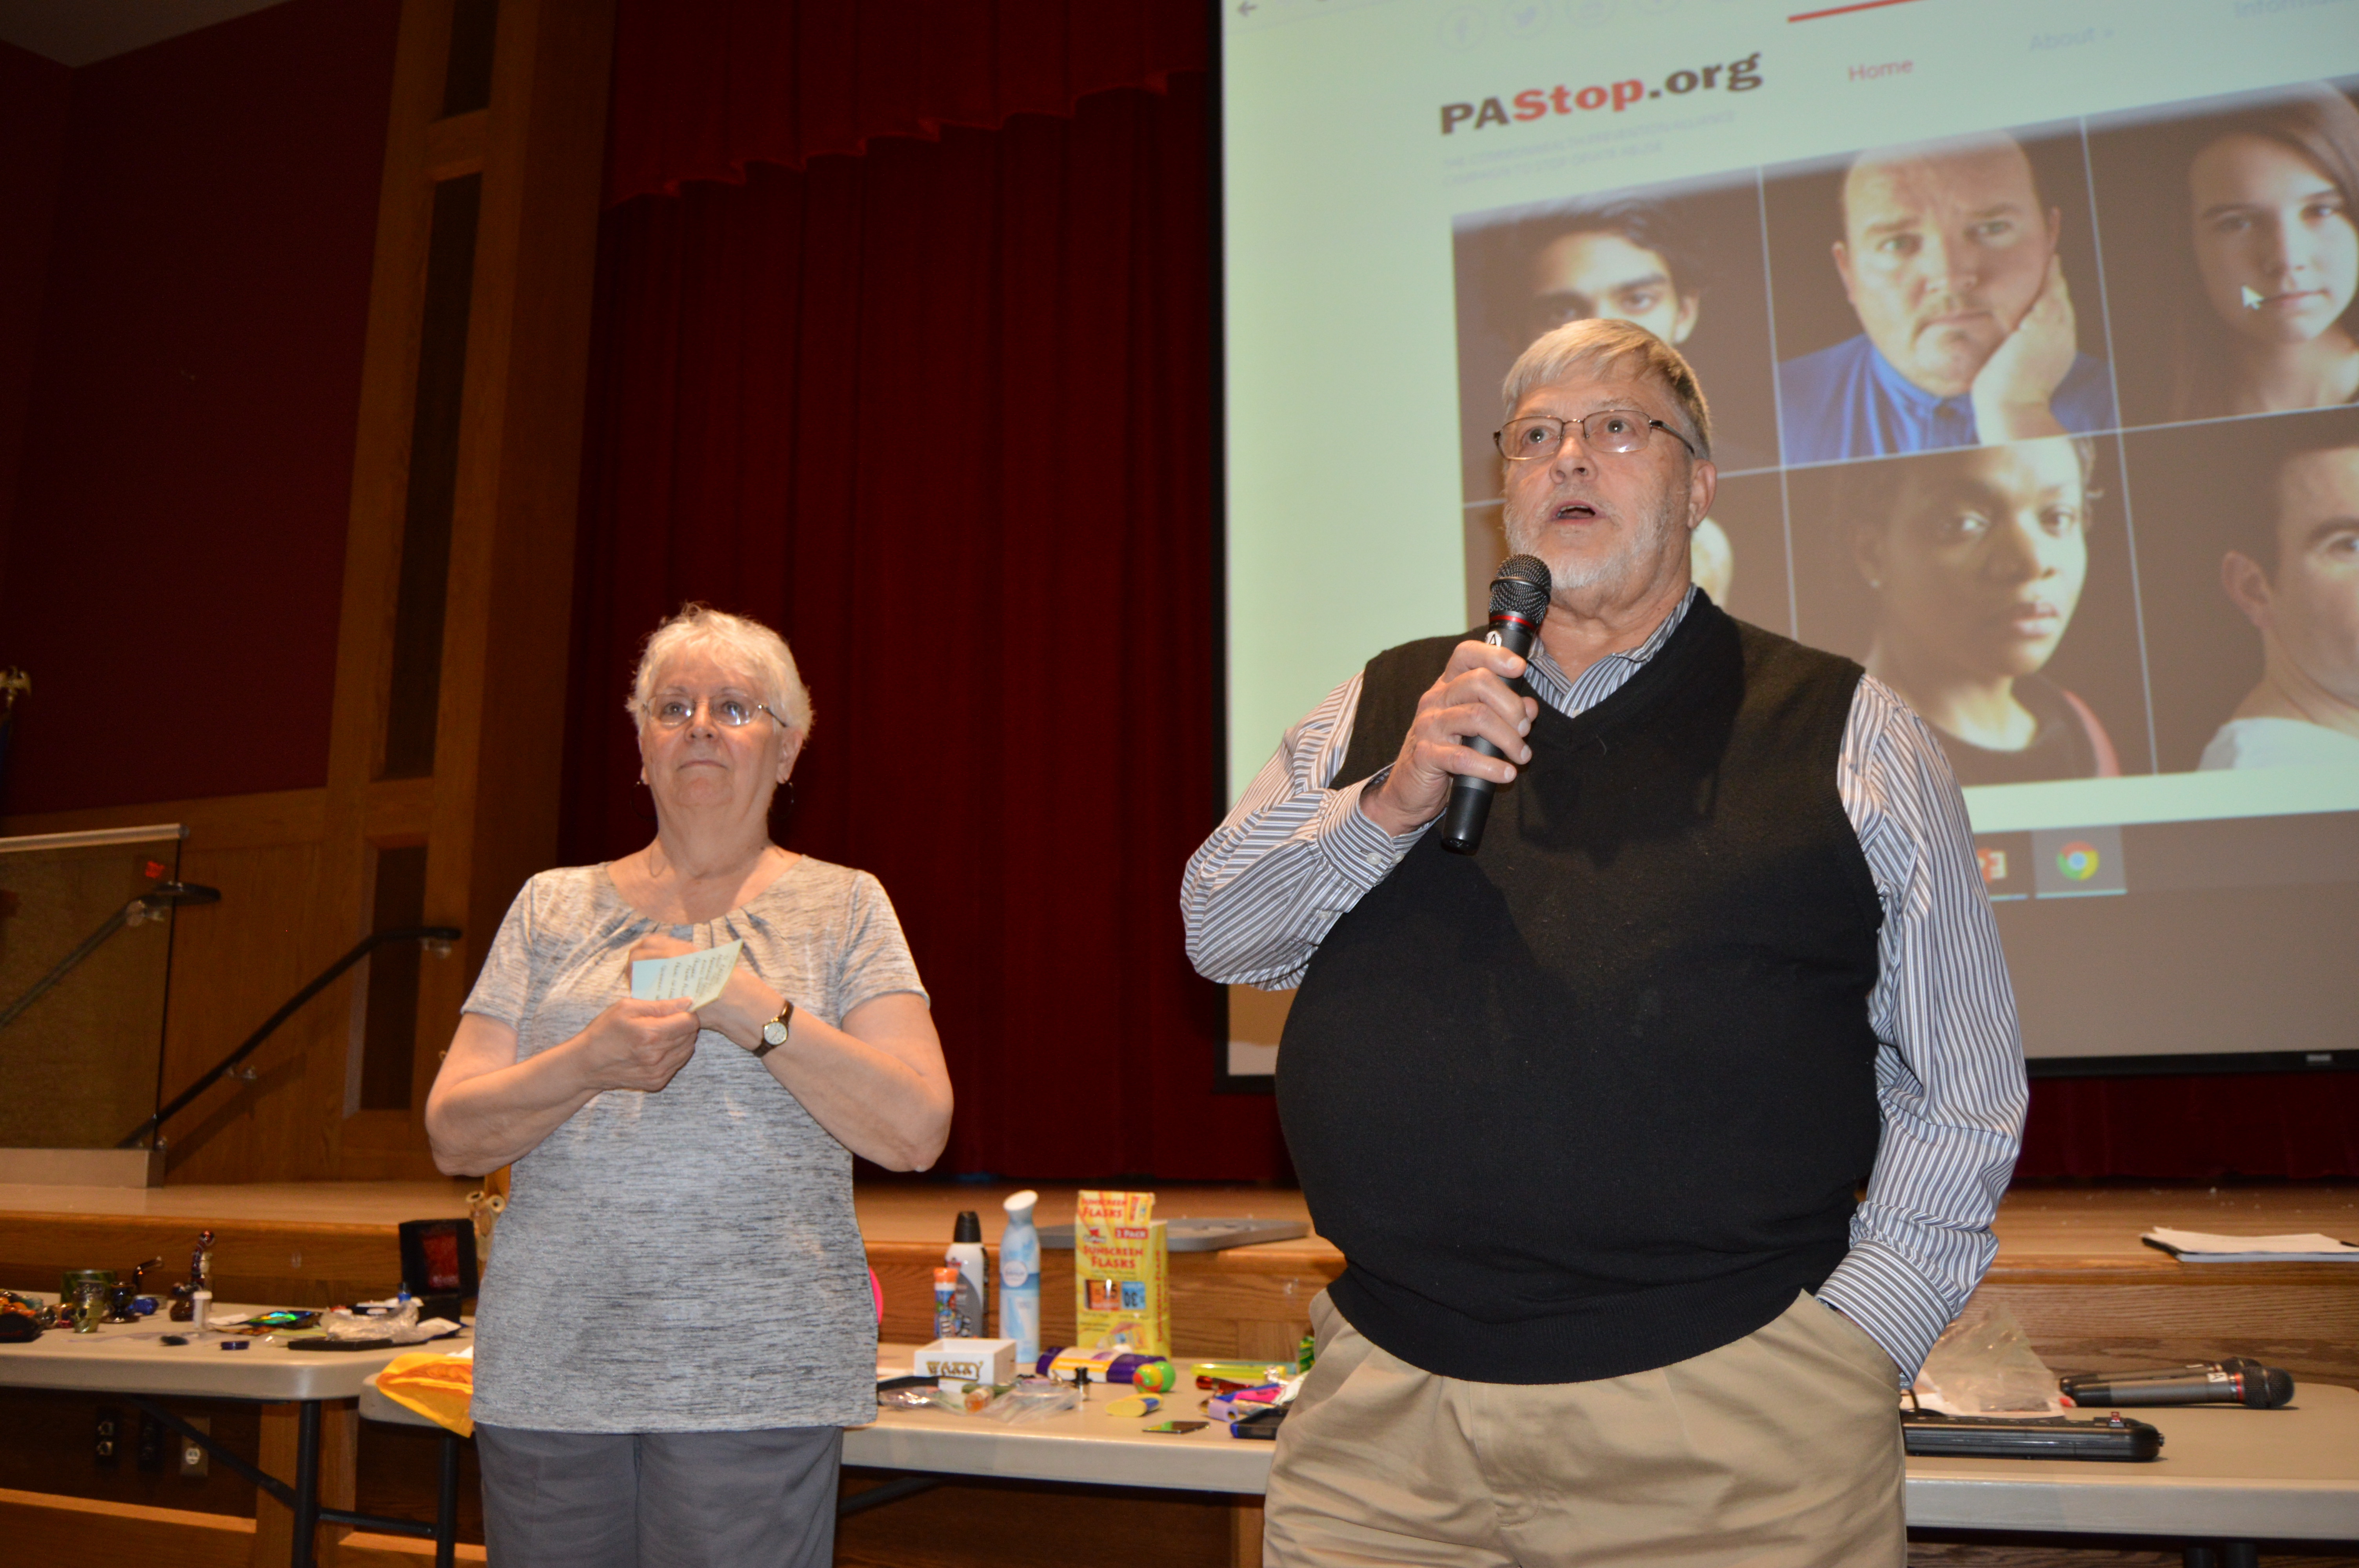 Clearfield Area School Board members Mary Anne Jackson, left, and Larry Putt, right, introduce members of a panel during Wednesday's drug and alcohol forum at the Clearfield Area Junior-Senior High School. The school board invited members of the Clearfield/Jefferson Drug and Alcohol Commission, the Clearfield County Coroner's Office, Clearfield EMS, Clearfield Borough and Lawrence Township Police Departments, the Clearfield County Probation Office and the Clearfield County District Attorney's Office to speak about trends in drug and alcohol abuse among school-aged children in Clearfield County (Photo by Kimberly Finnigan)